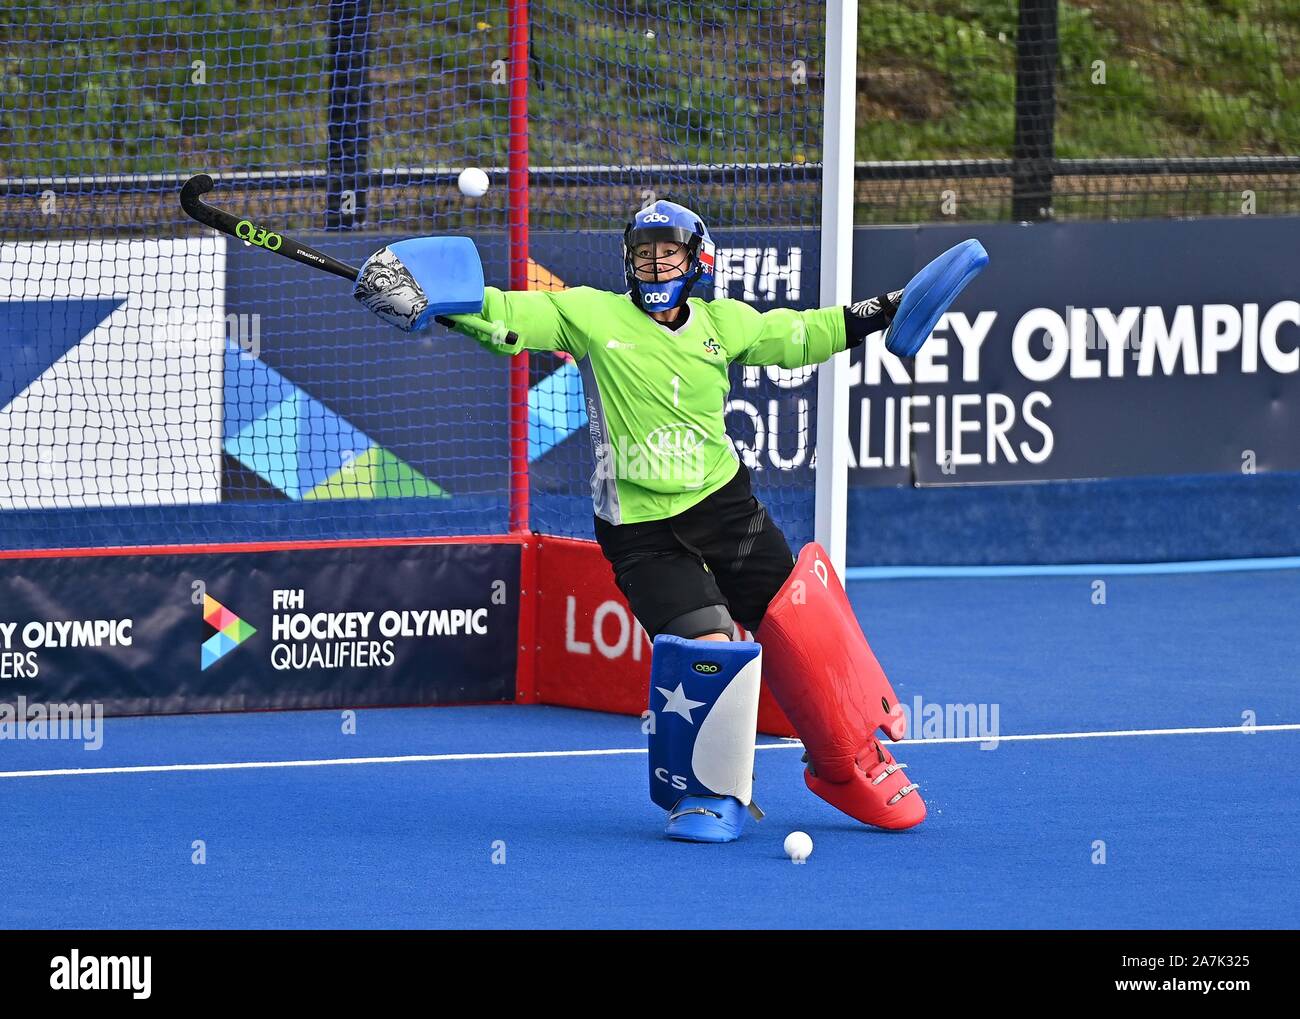 Stratford, London, UK. 3rd November 2019. Claudia Schuler (Chile, goalkeeper) during the warm up. Great Britain v Chile. FIH Womens Olympic hockey qualifier. Lee Valley hockey and tennis centre. Stratford. London. United Kingdom. Credit: Sport In Pictures/Alamy Live News Stock Photo